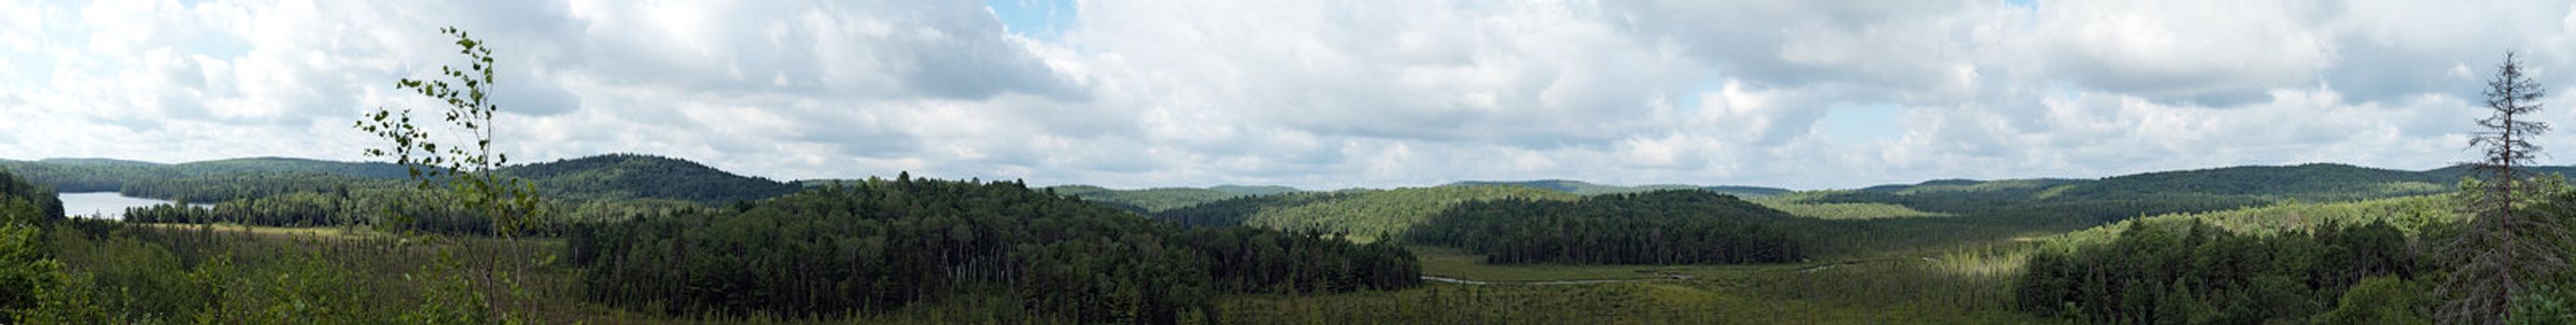 Lake, river, forest panorama landscape at Algonquin Park in Ontario Canada